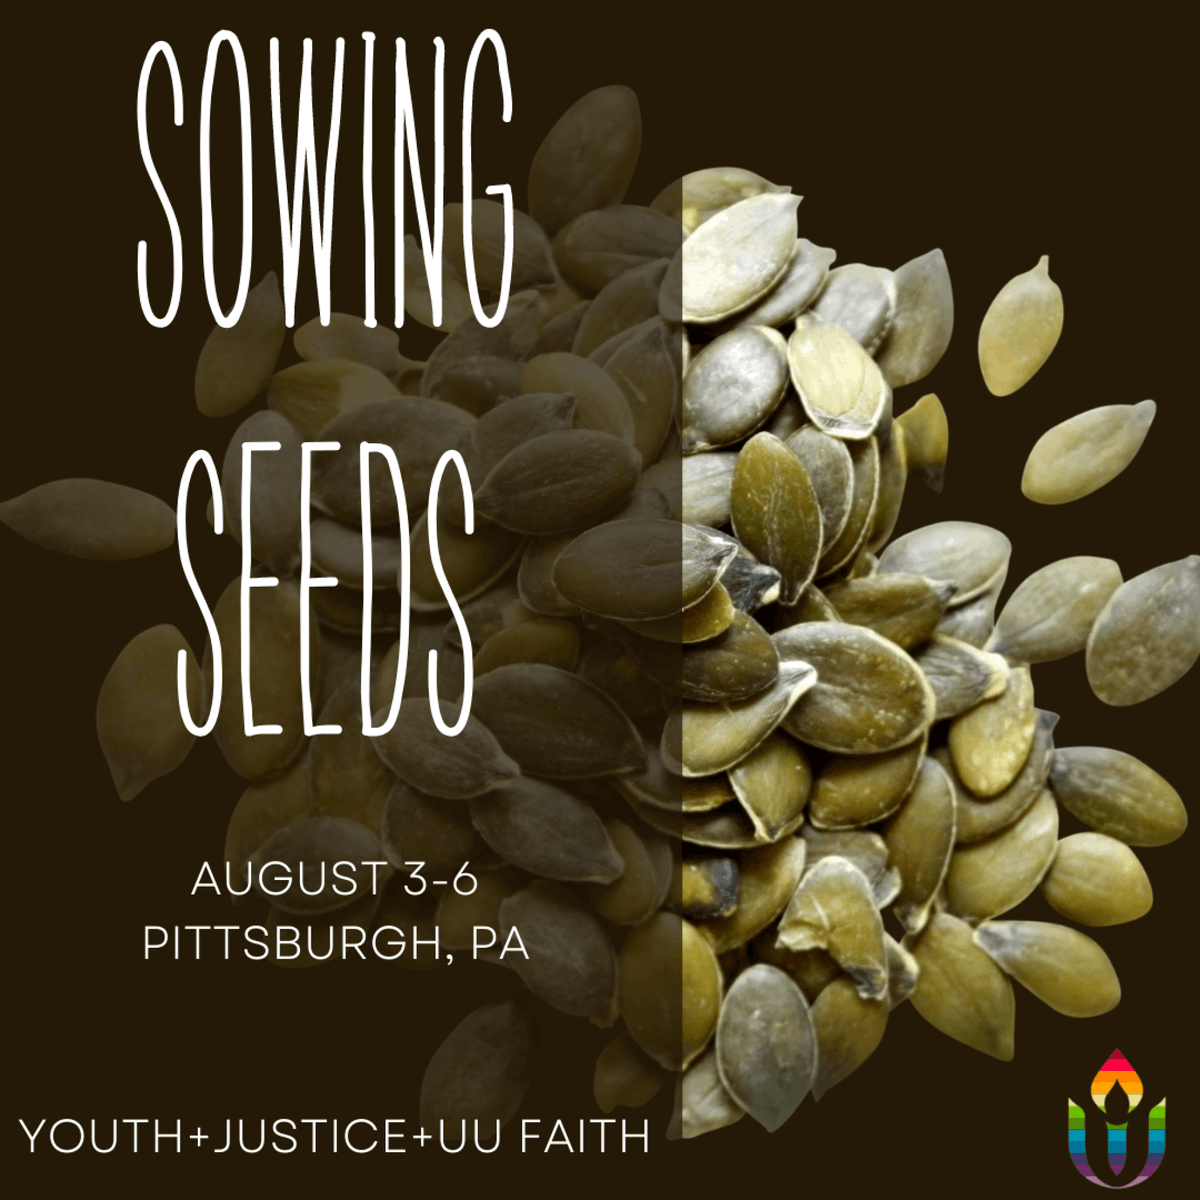 Sowing Seeds Youth Justice Workshop
Registration will open on June 1, 2022!
https://t.co/ApMOqVDnZn https://t.co/O3CUkeIZPs